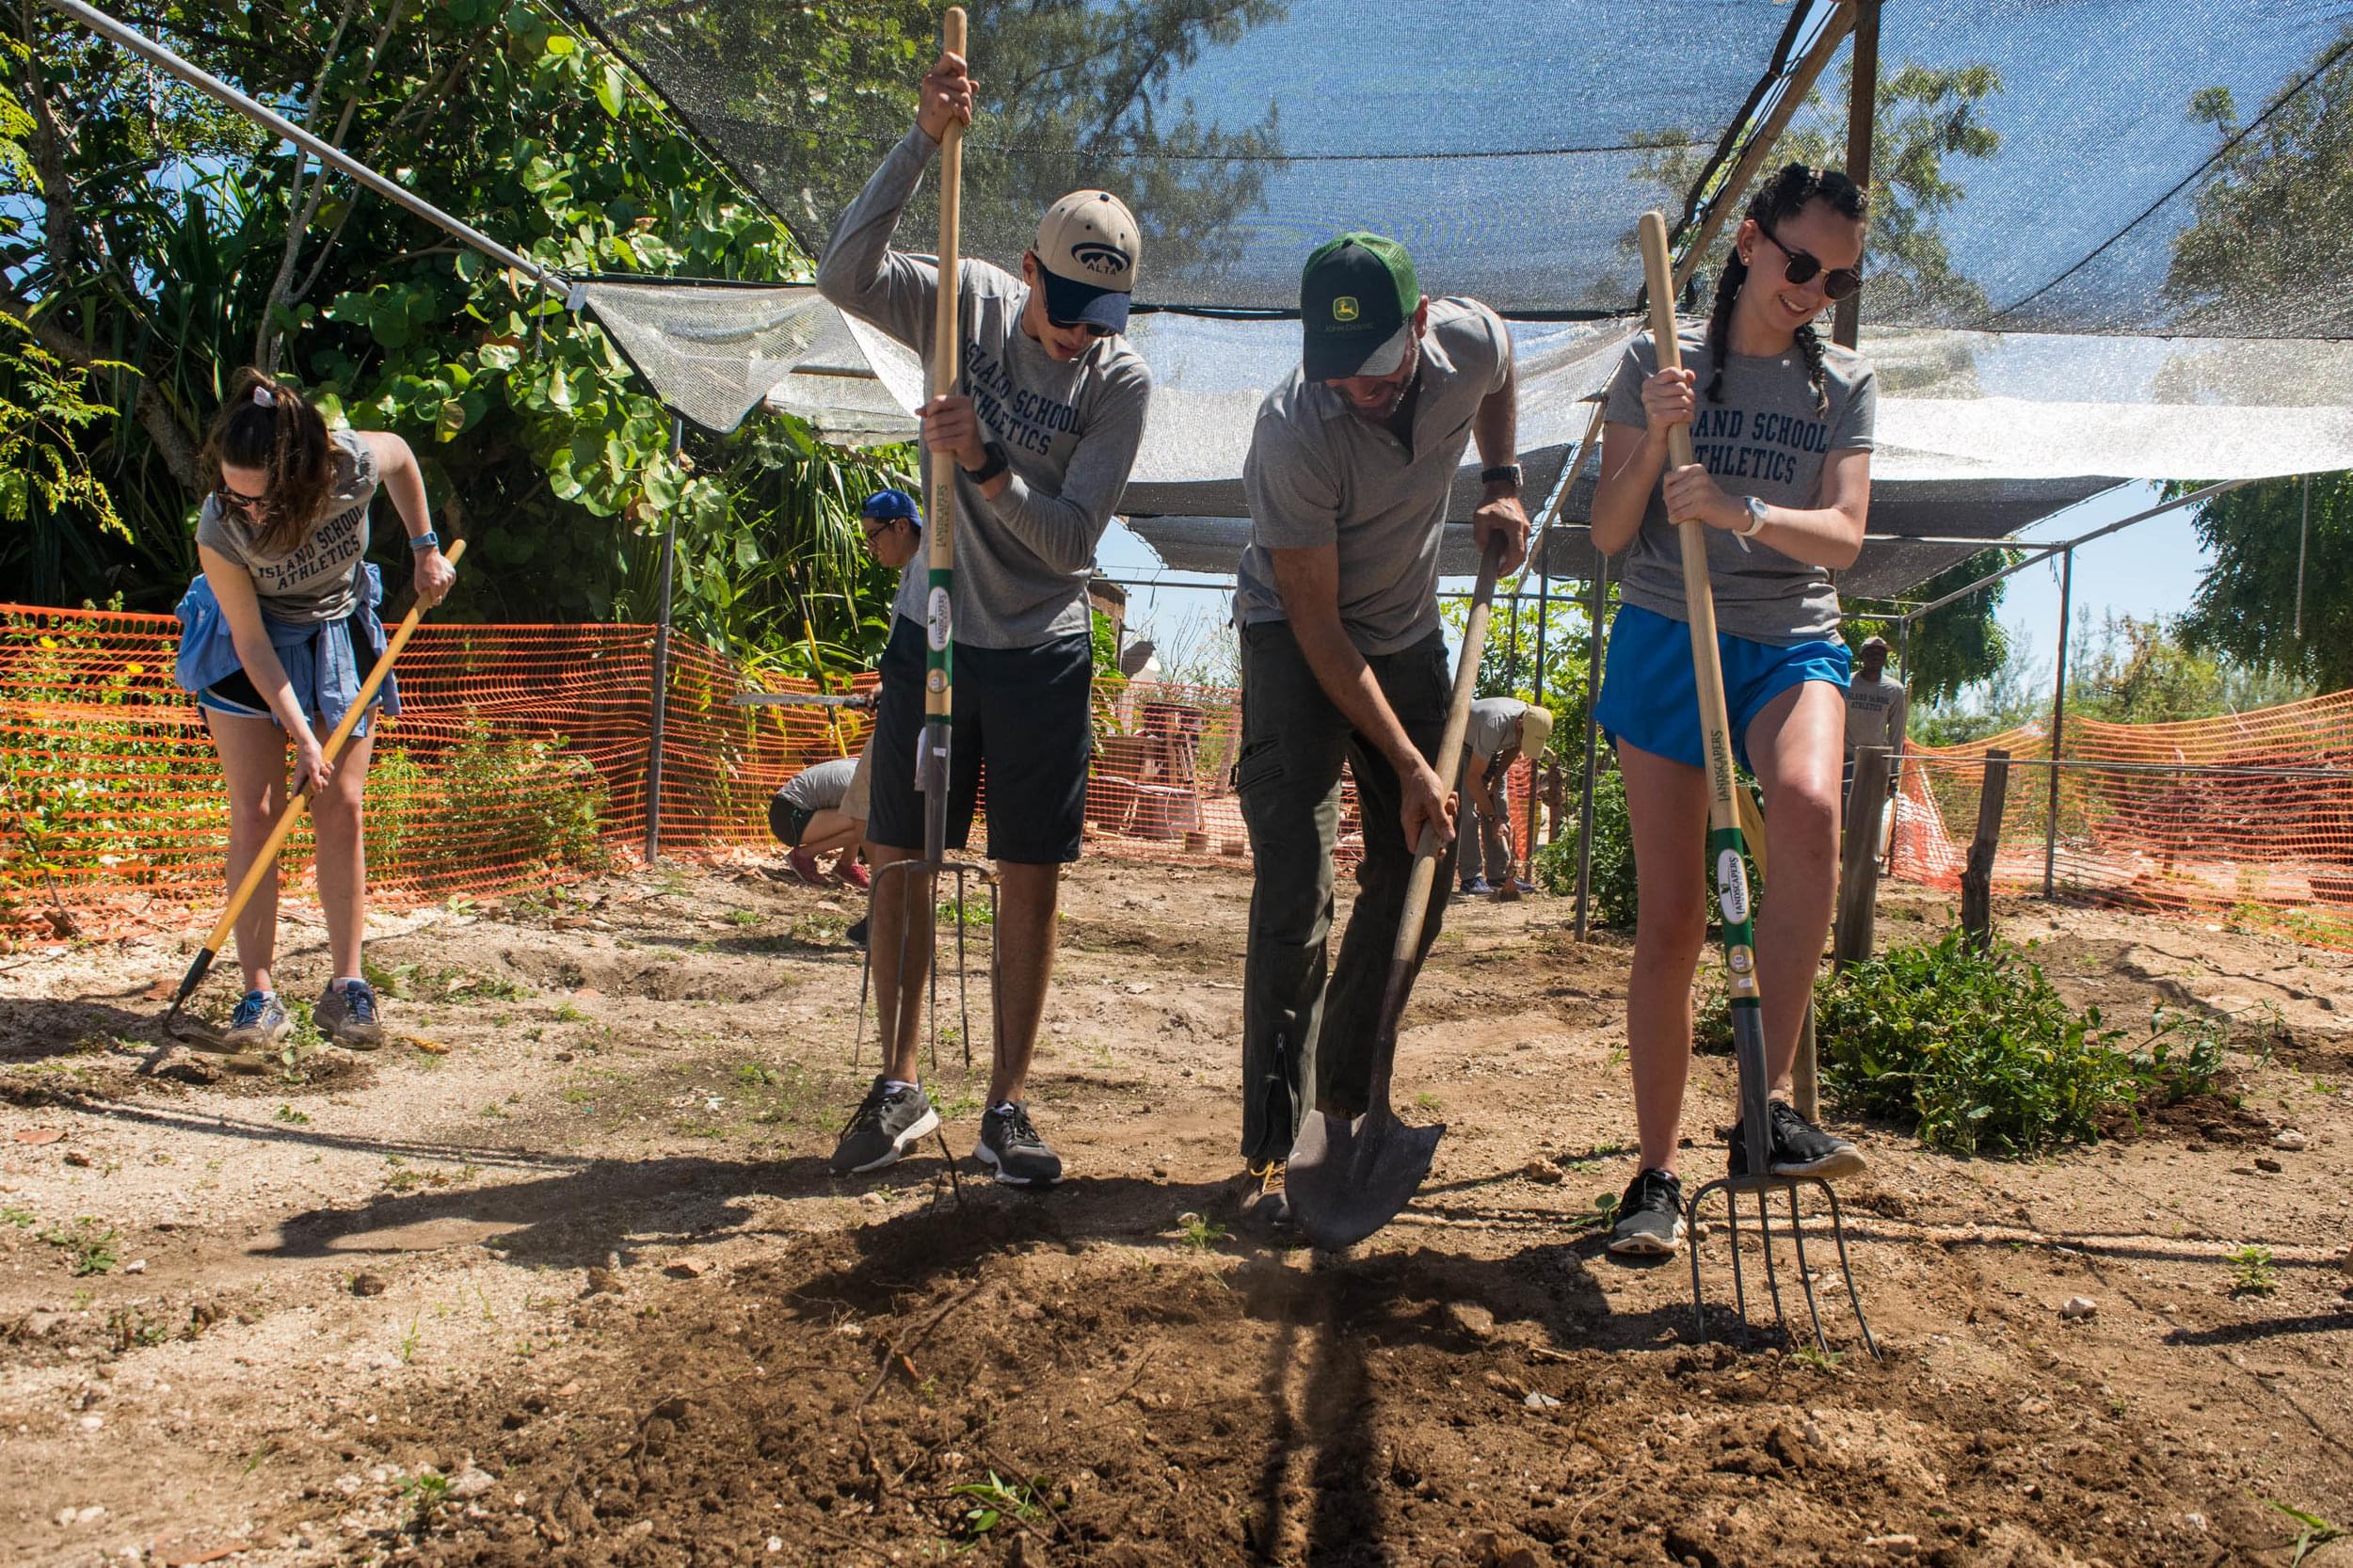 Teamwork makes the dream work! Students aerate the soil to prepare the new grow beds.